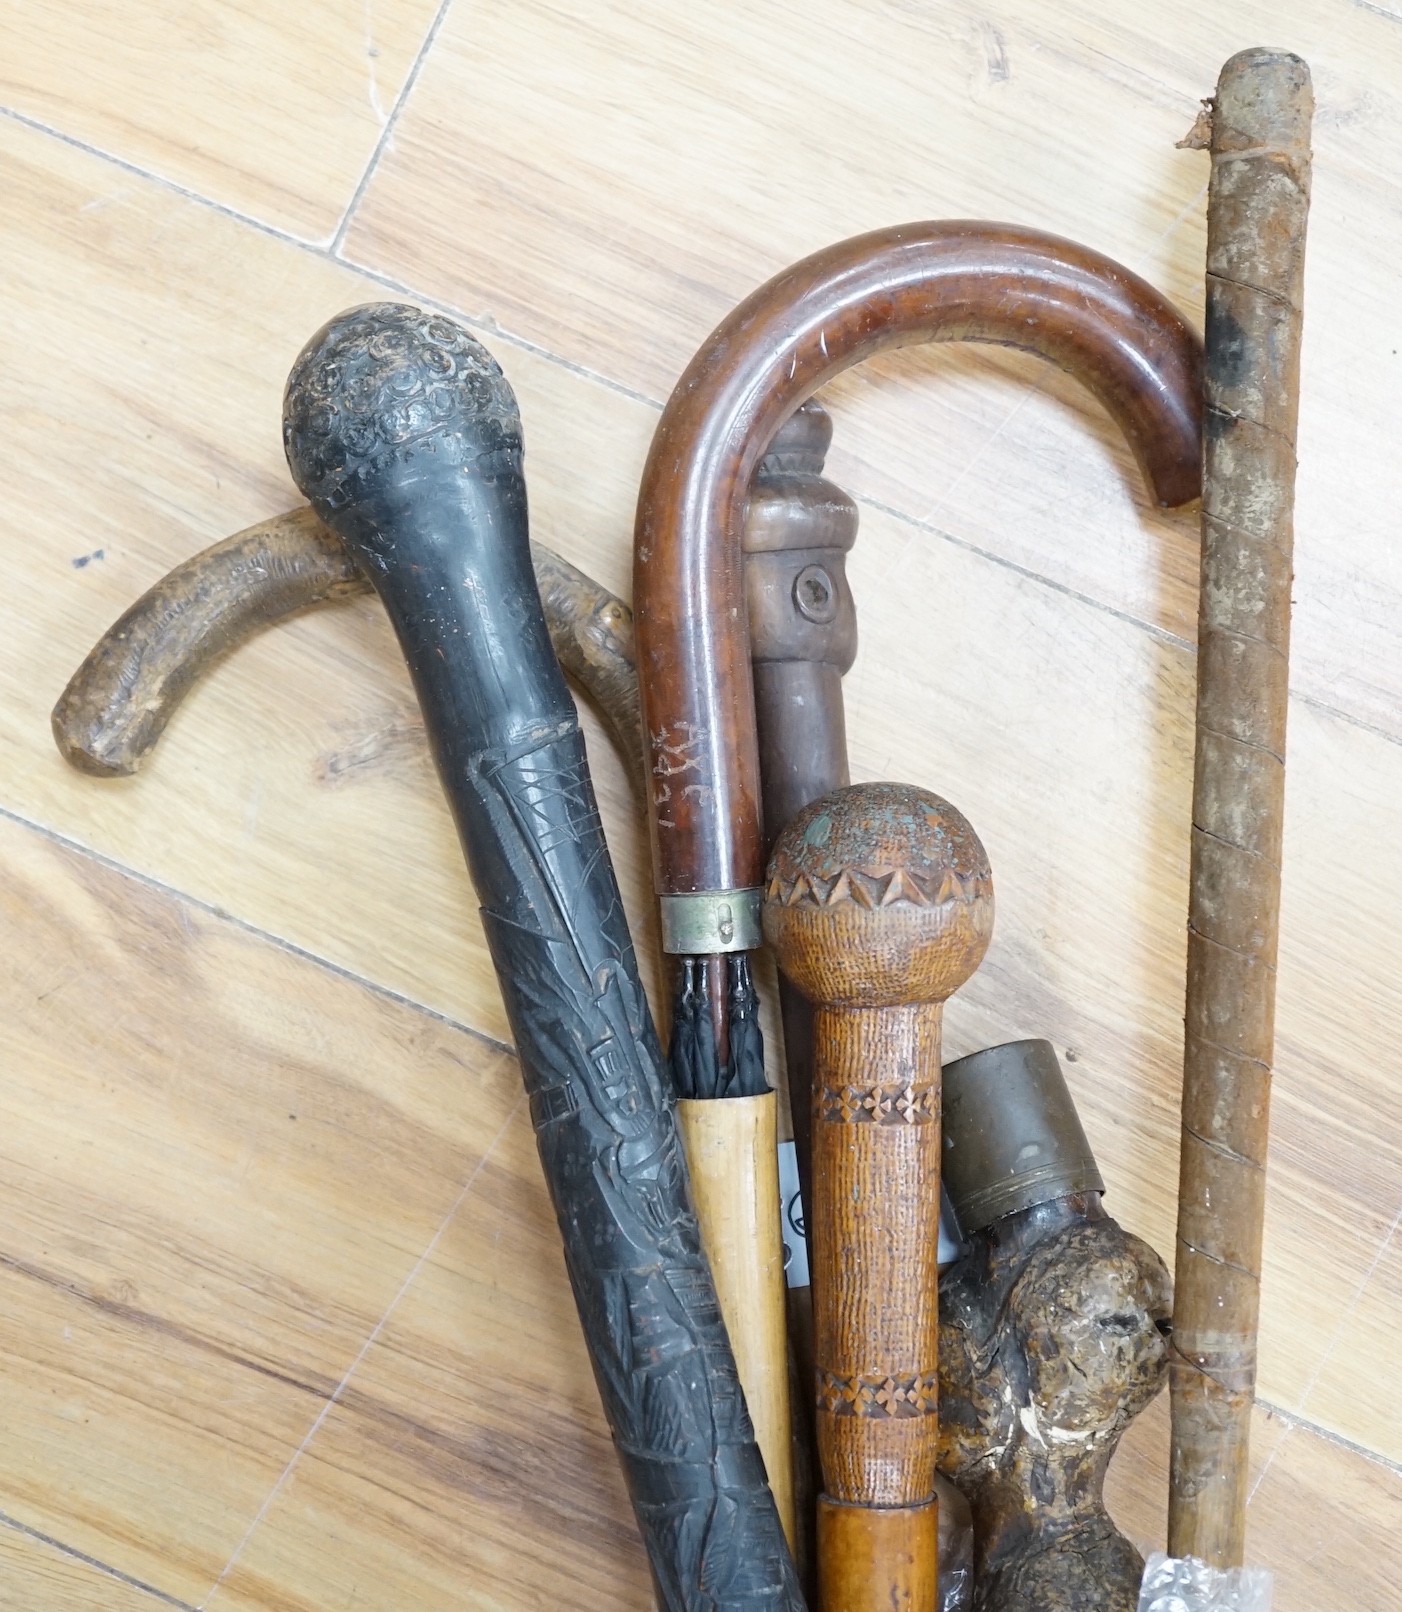 An early 20th century umbrella walking stick, five others and a golf club